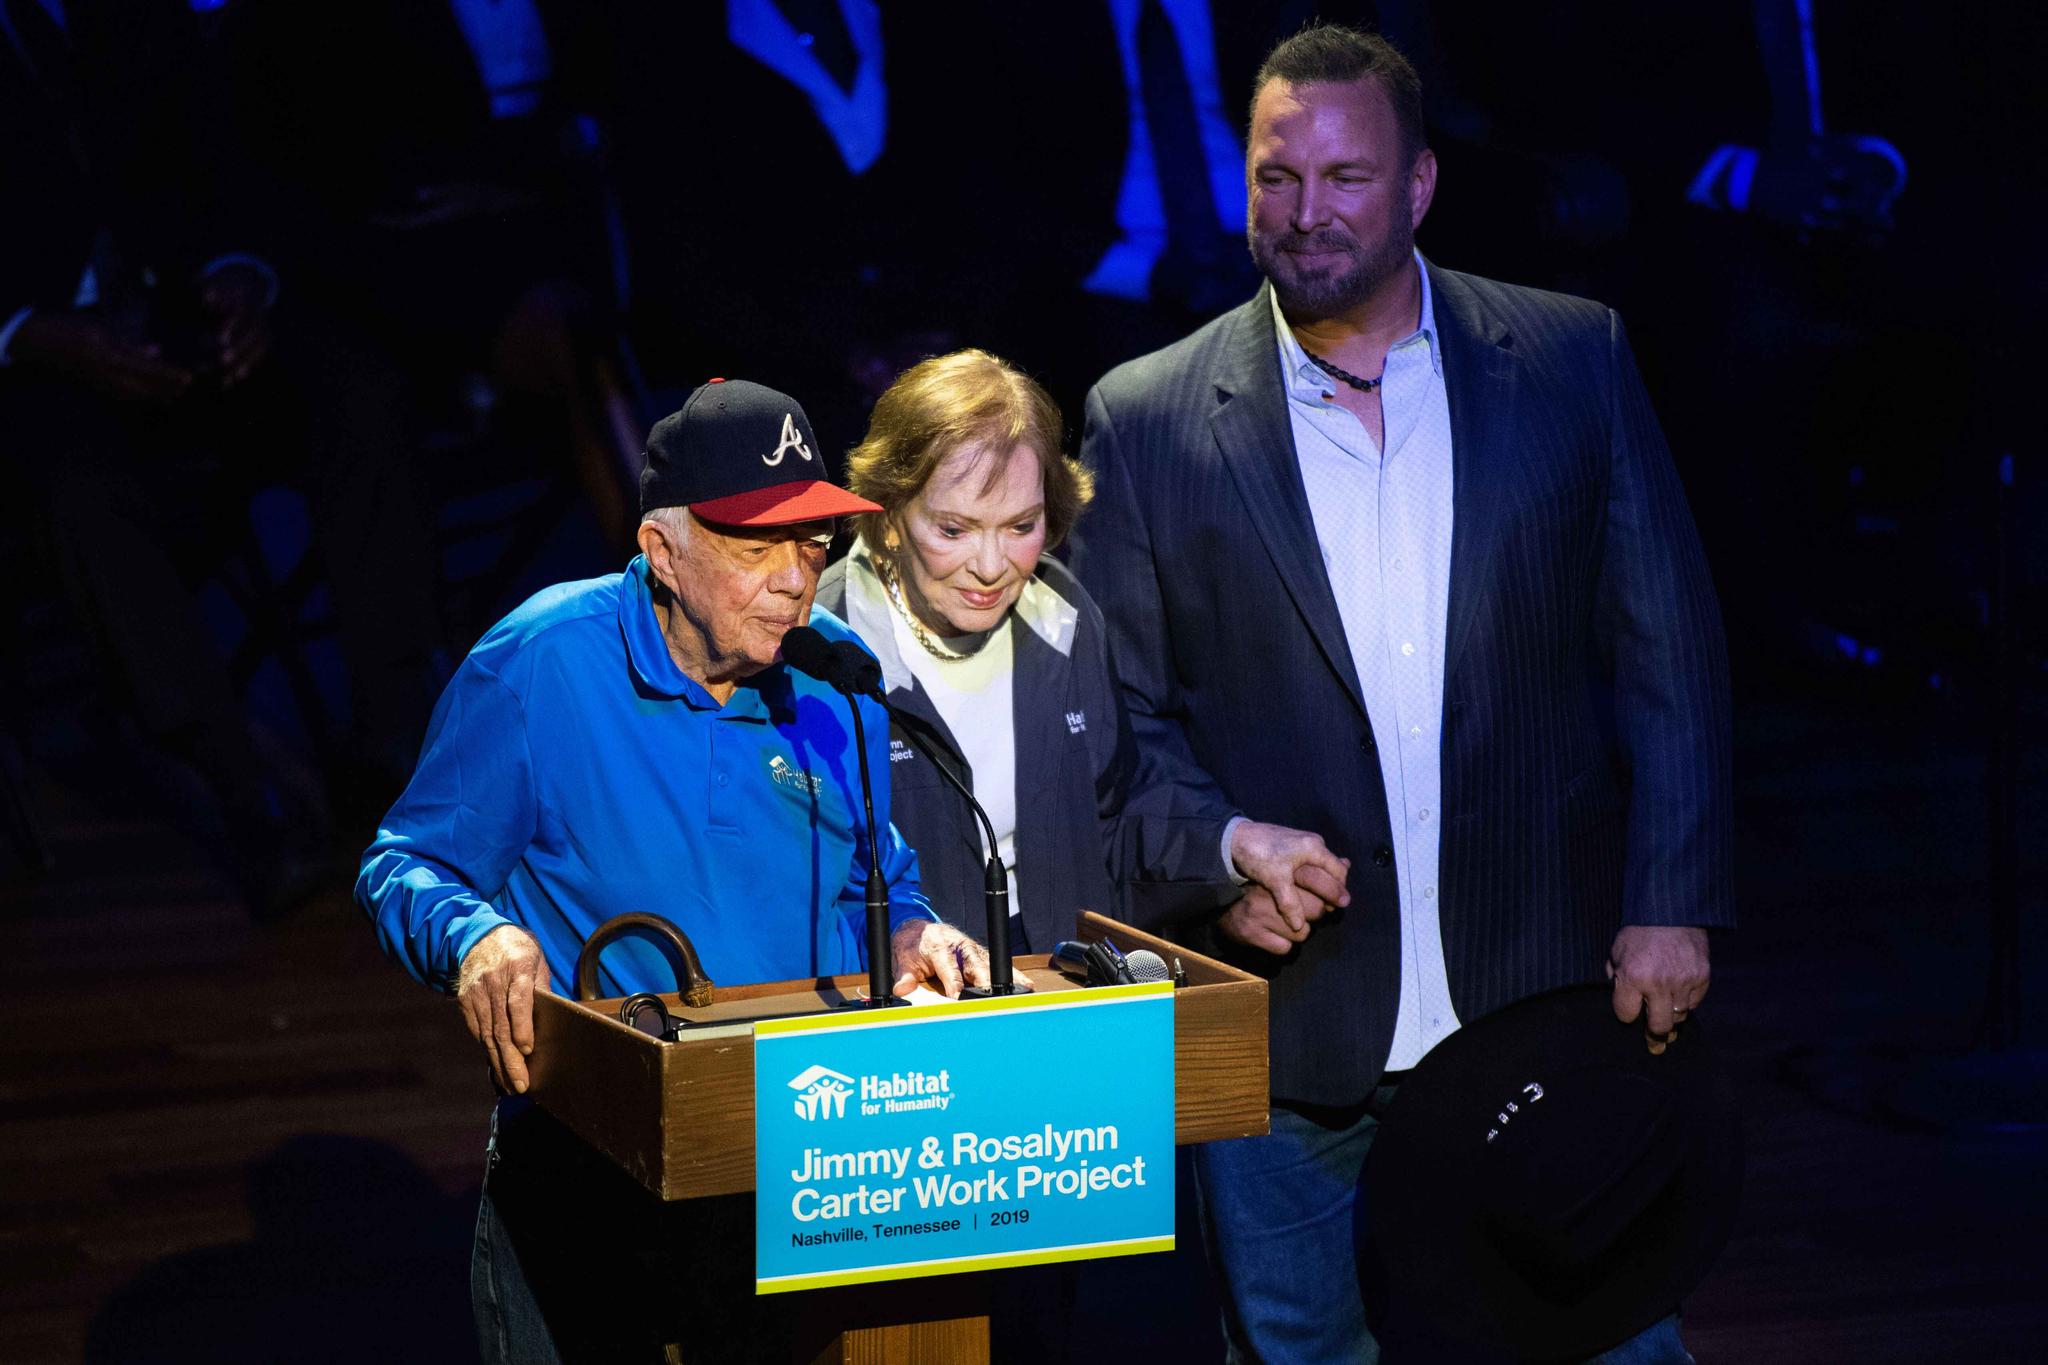 JImmy & Rosalyn Carter At Habitat For Humanity Event